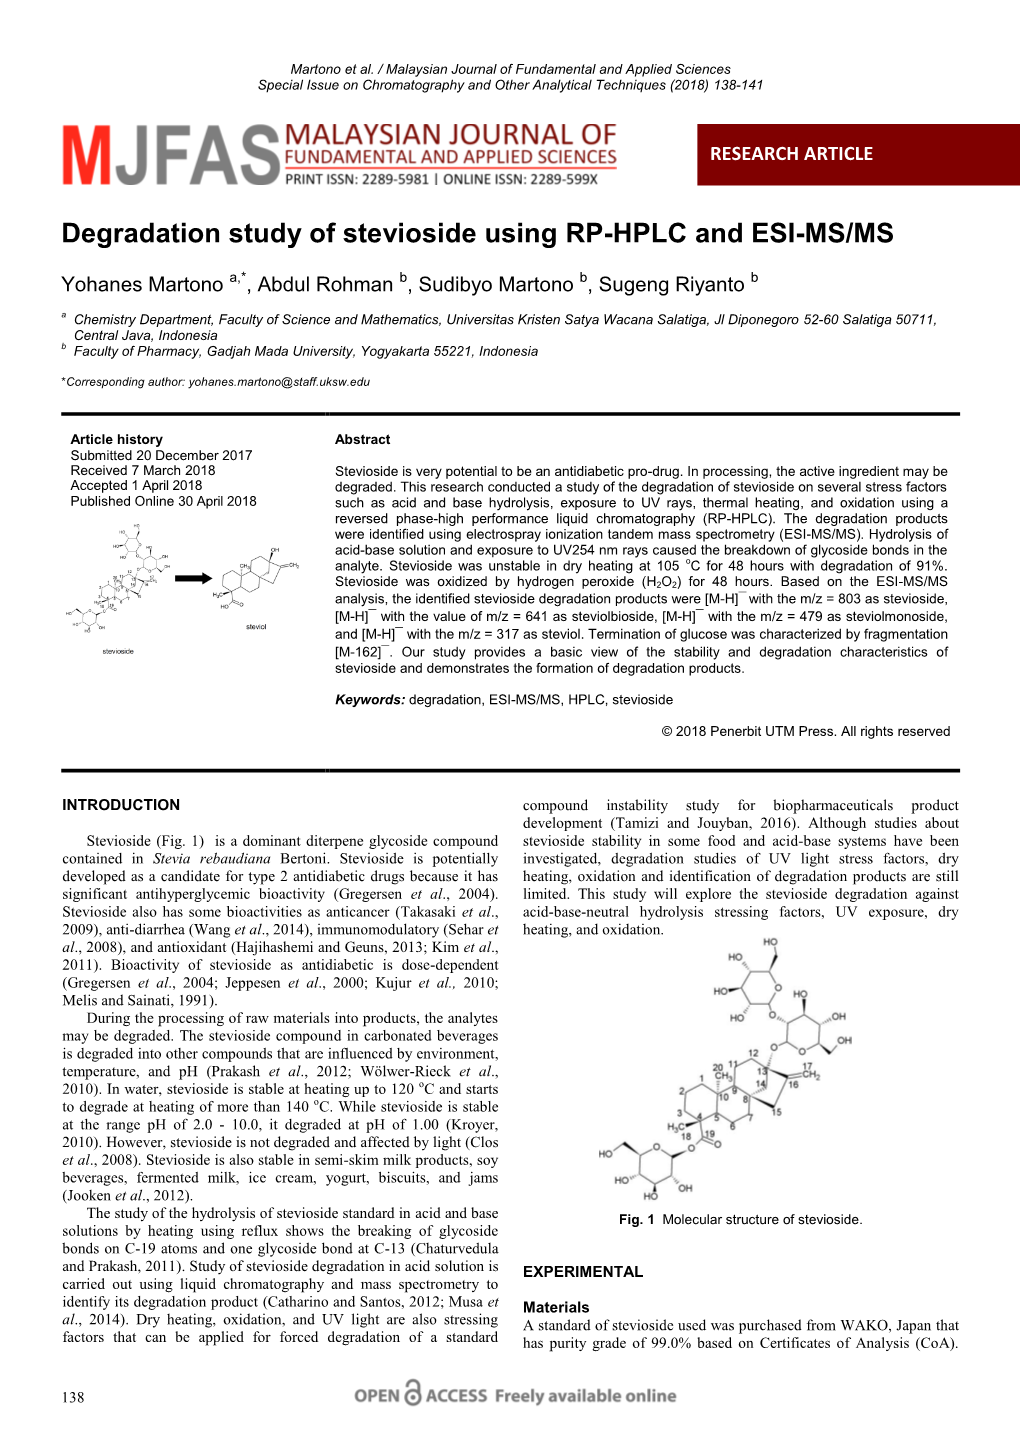 Degradation Study of Stevioside Using RP-HPLC and ESI-MS/MS